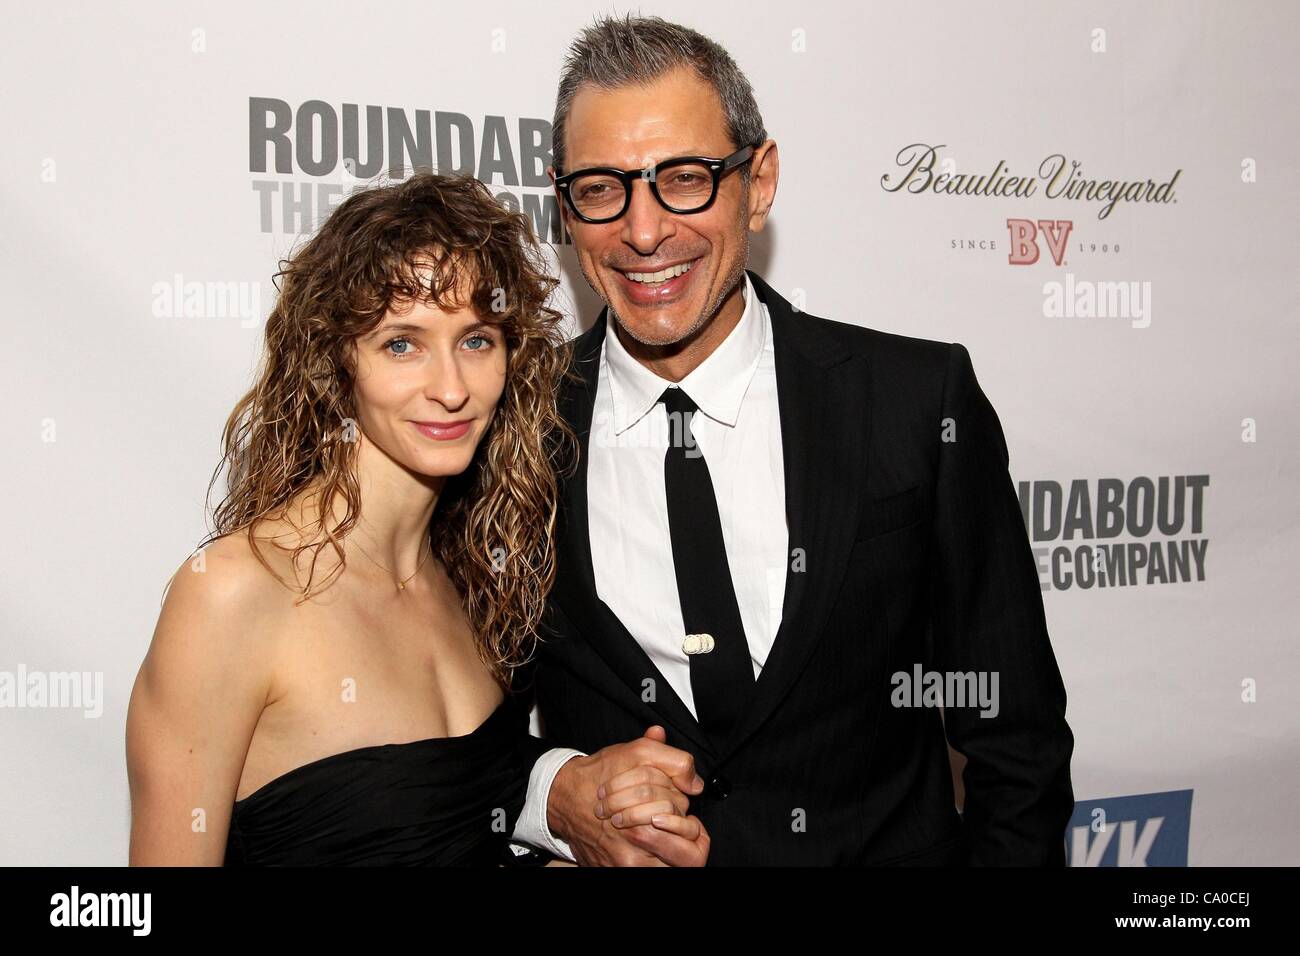 Emilie Livingston, Jeff Goldblum at arrivals for The Roundabout Theatre Company's 2012 Spring Gala, Hammerstein Ballroom, New York, NY March 12, 2012. Photo By: Steve Mack/Everett Collection Stock Photo